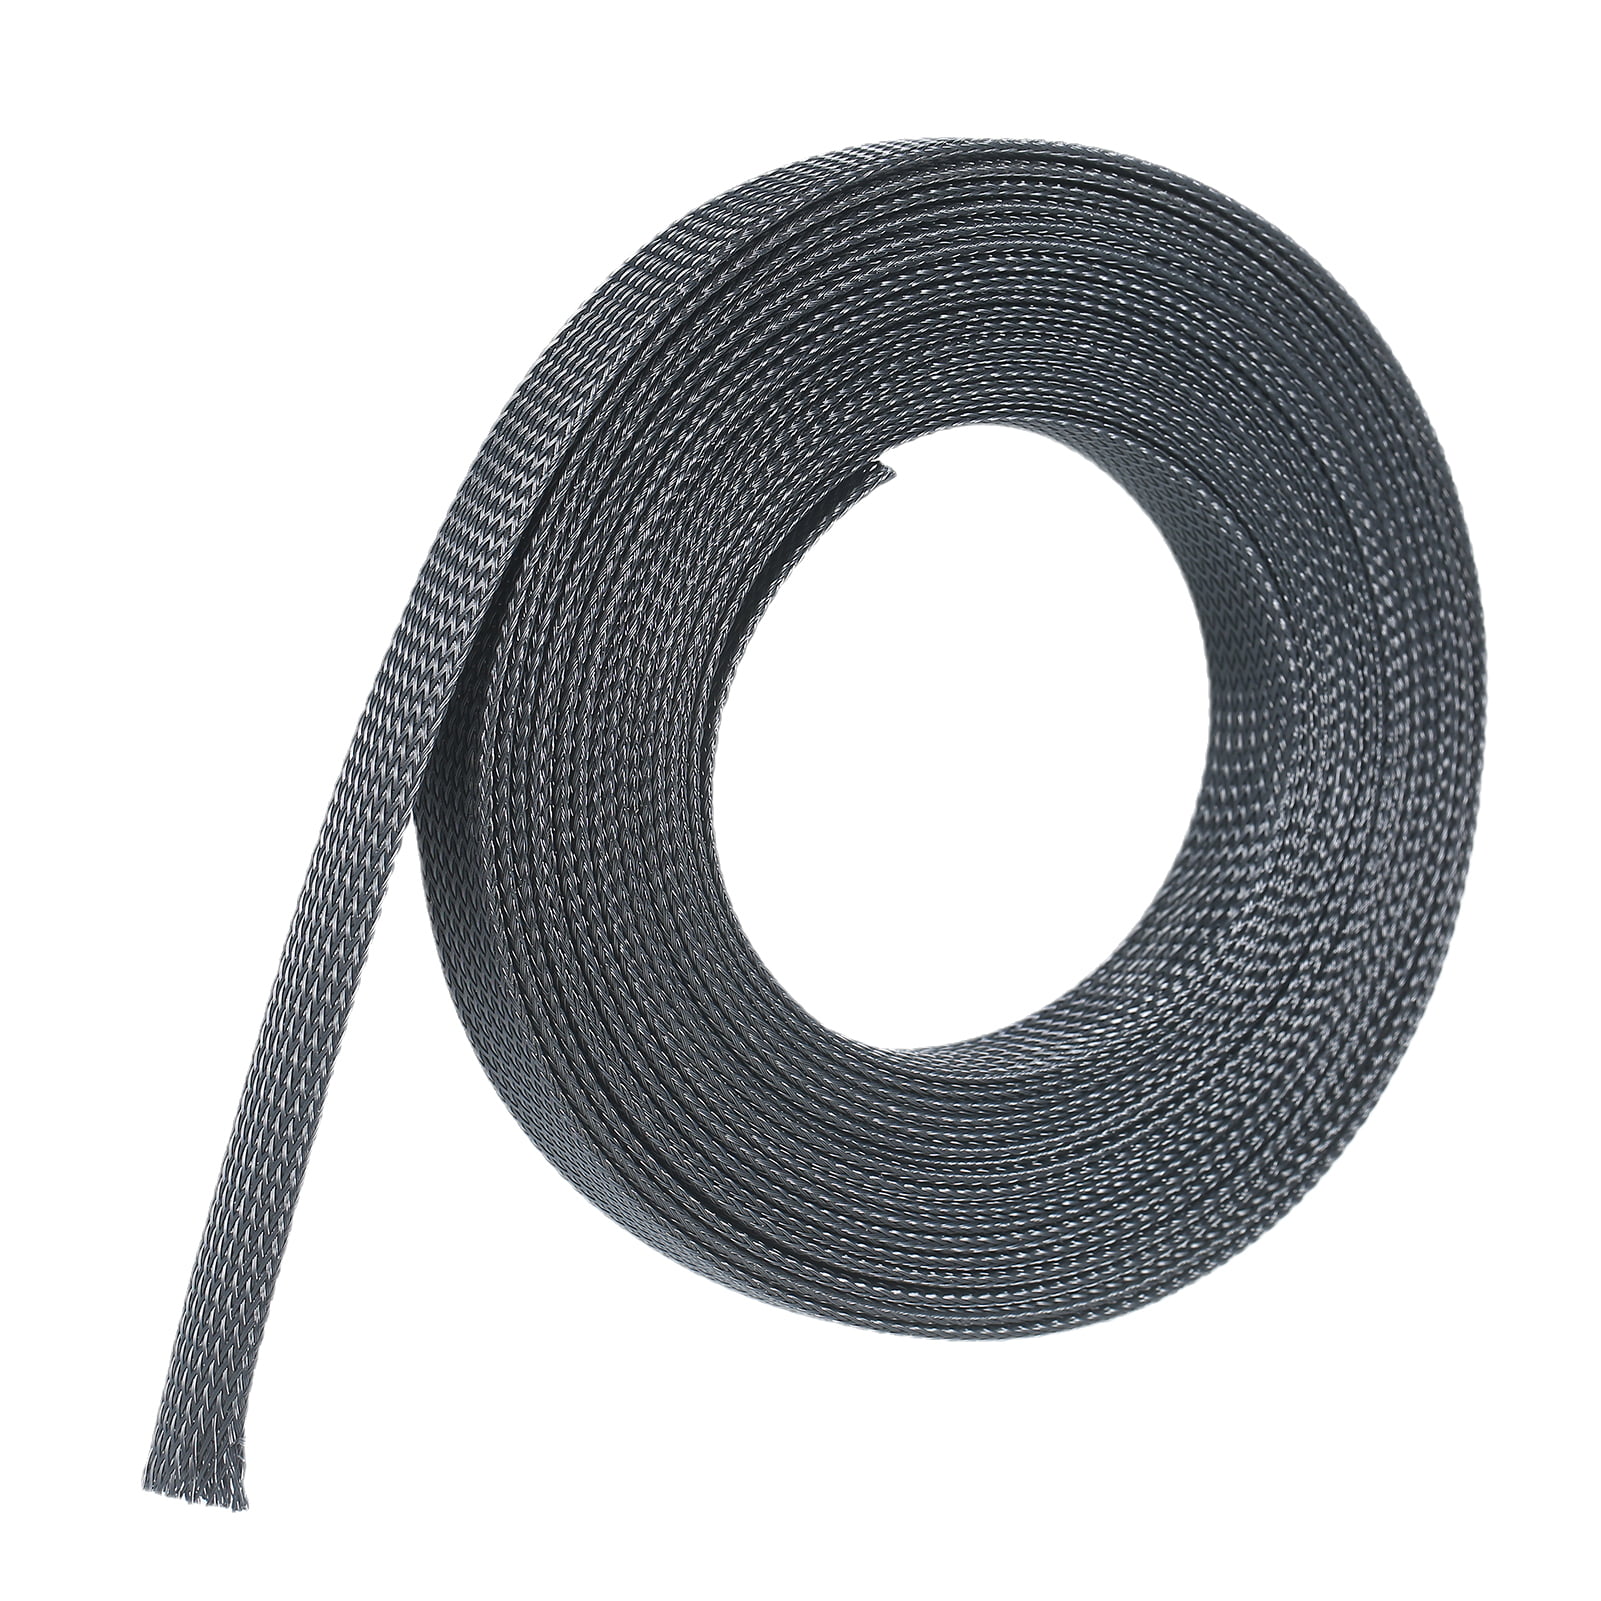 3mm to 25mm Black+Slive Flame Retardant Expandable Braided Cable Sleeving